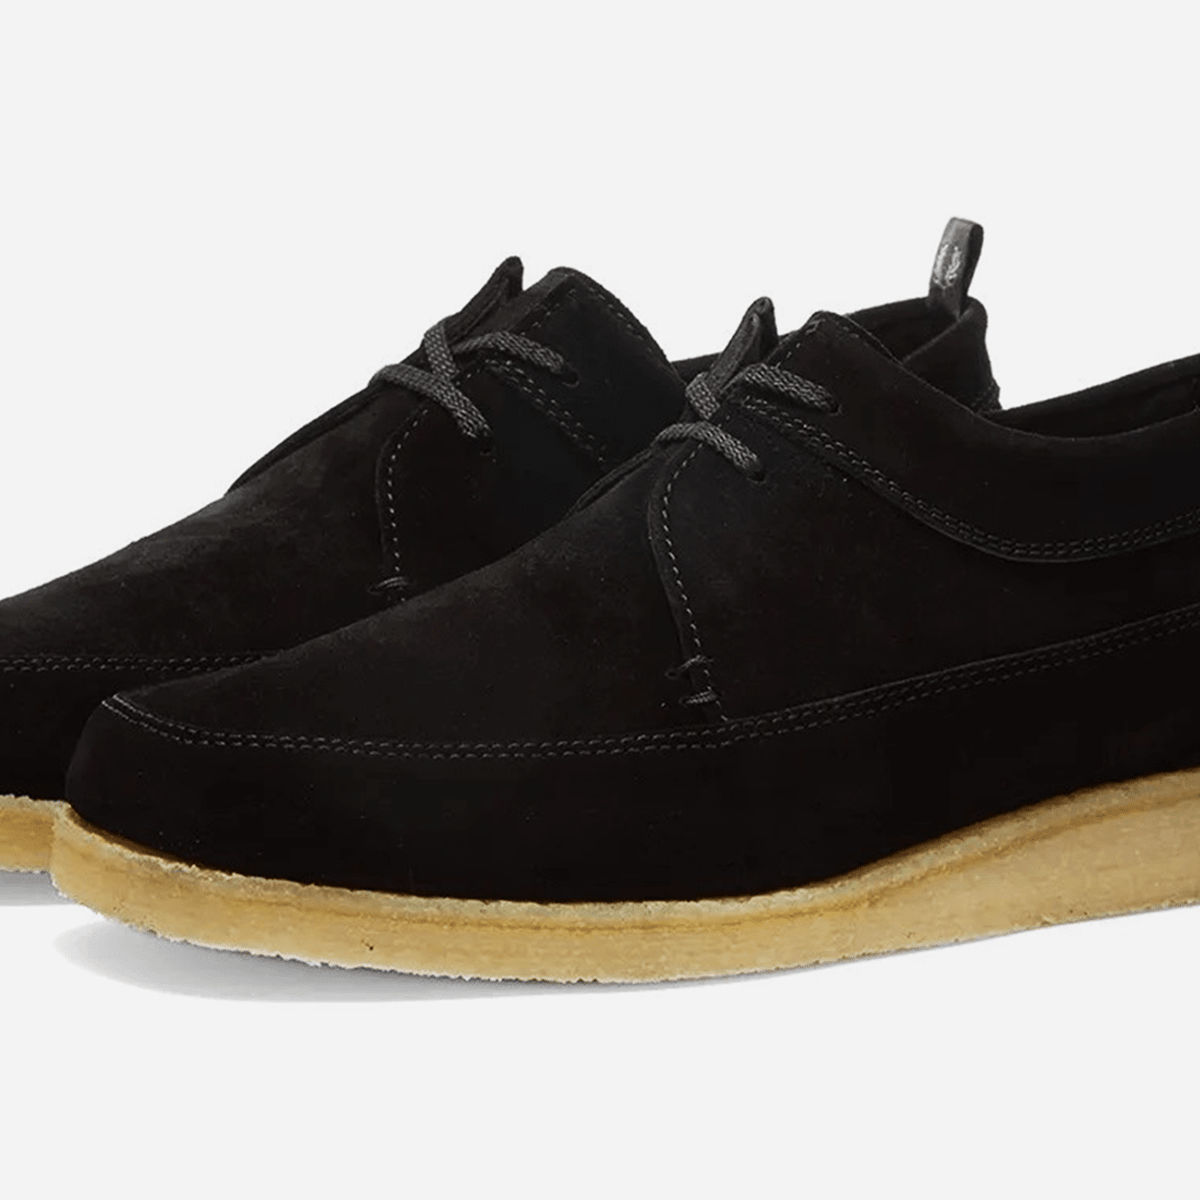 Fred Perry x Padmore & Barnes Release Stylish Suede Shoe Collab